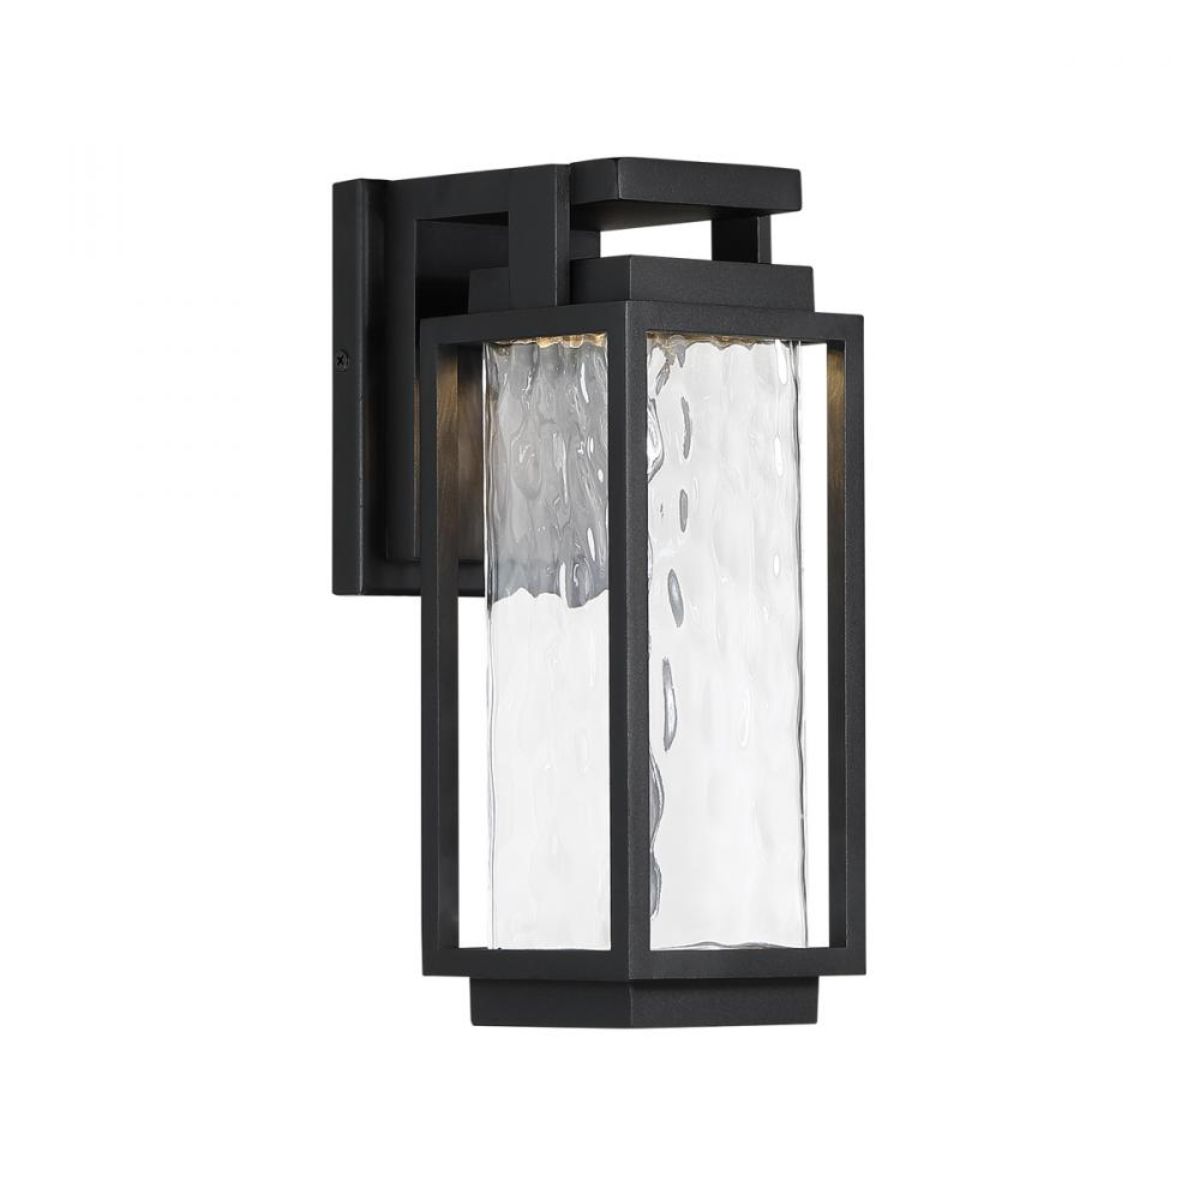 Two If By Sea 12 In. LED Outdoor Wall Sconce 870 lumens Black Finish